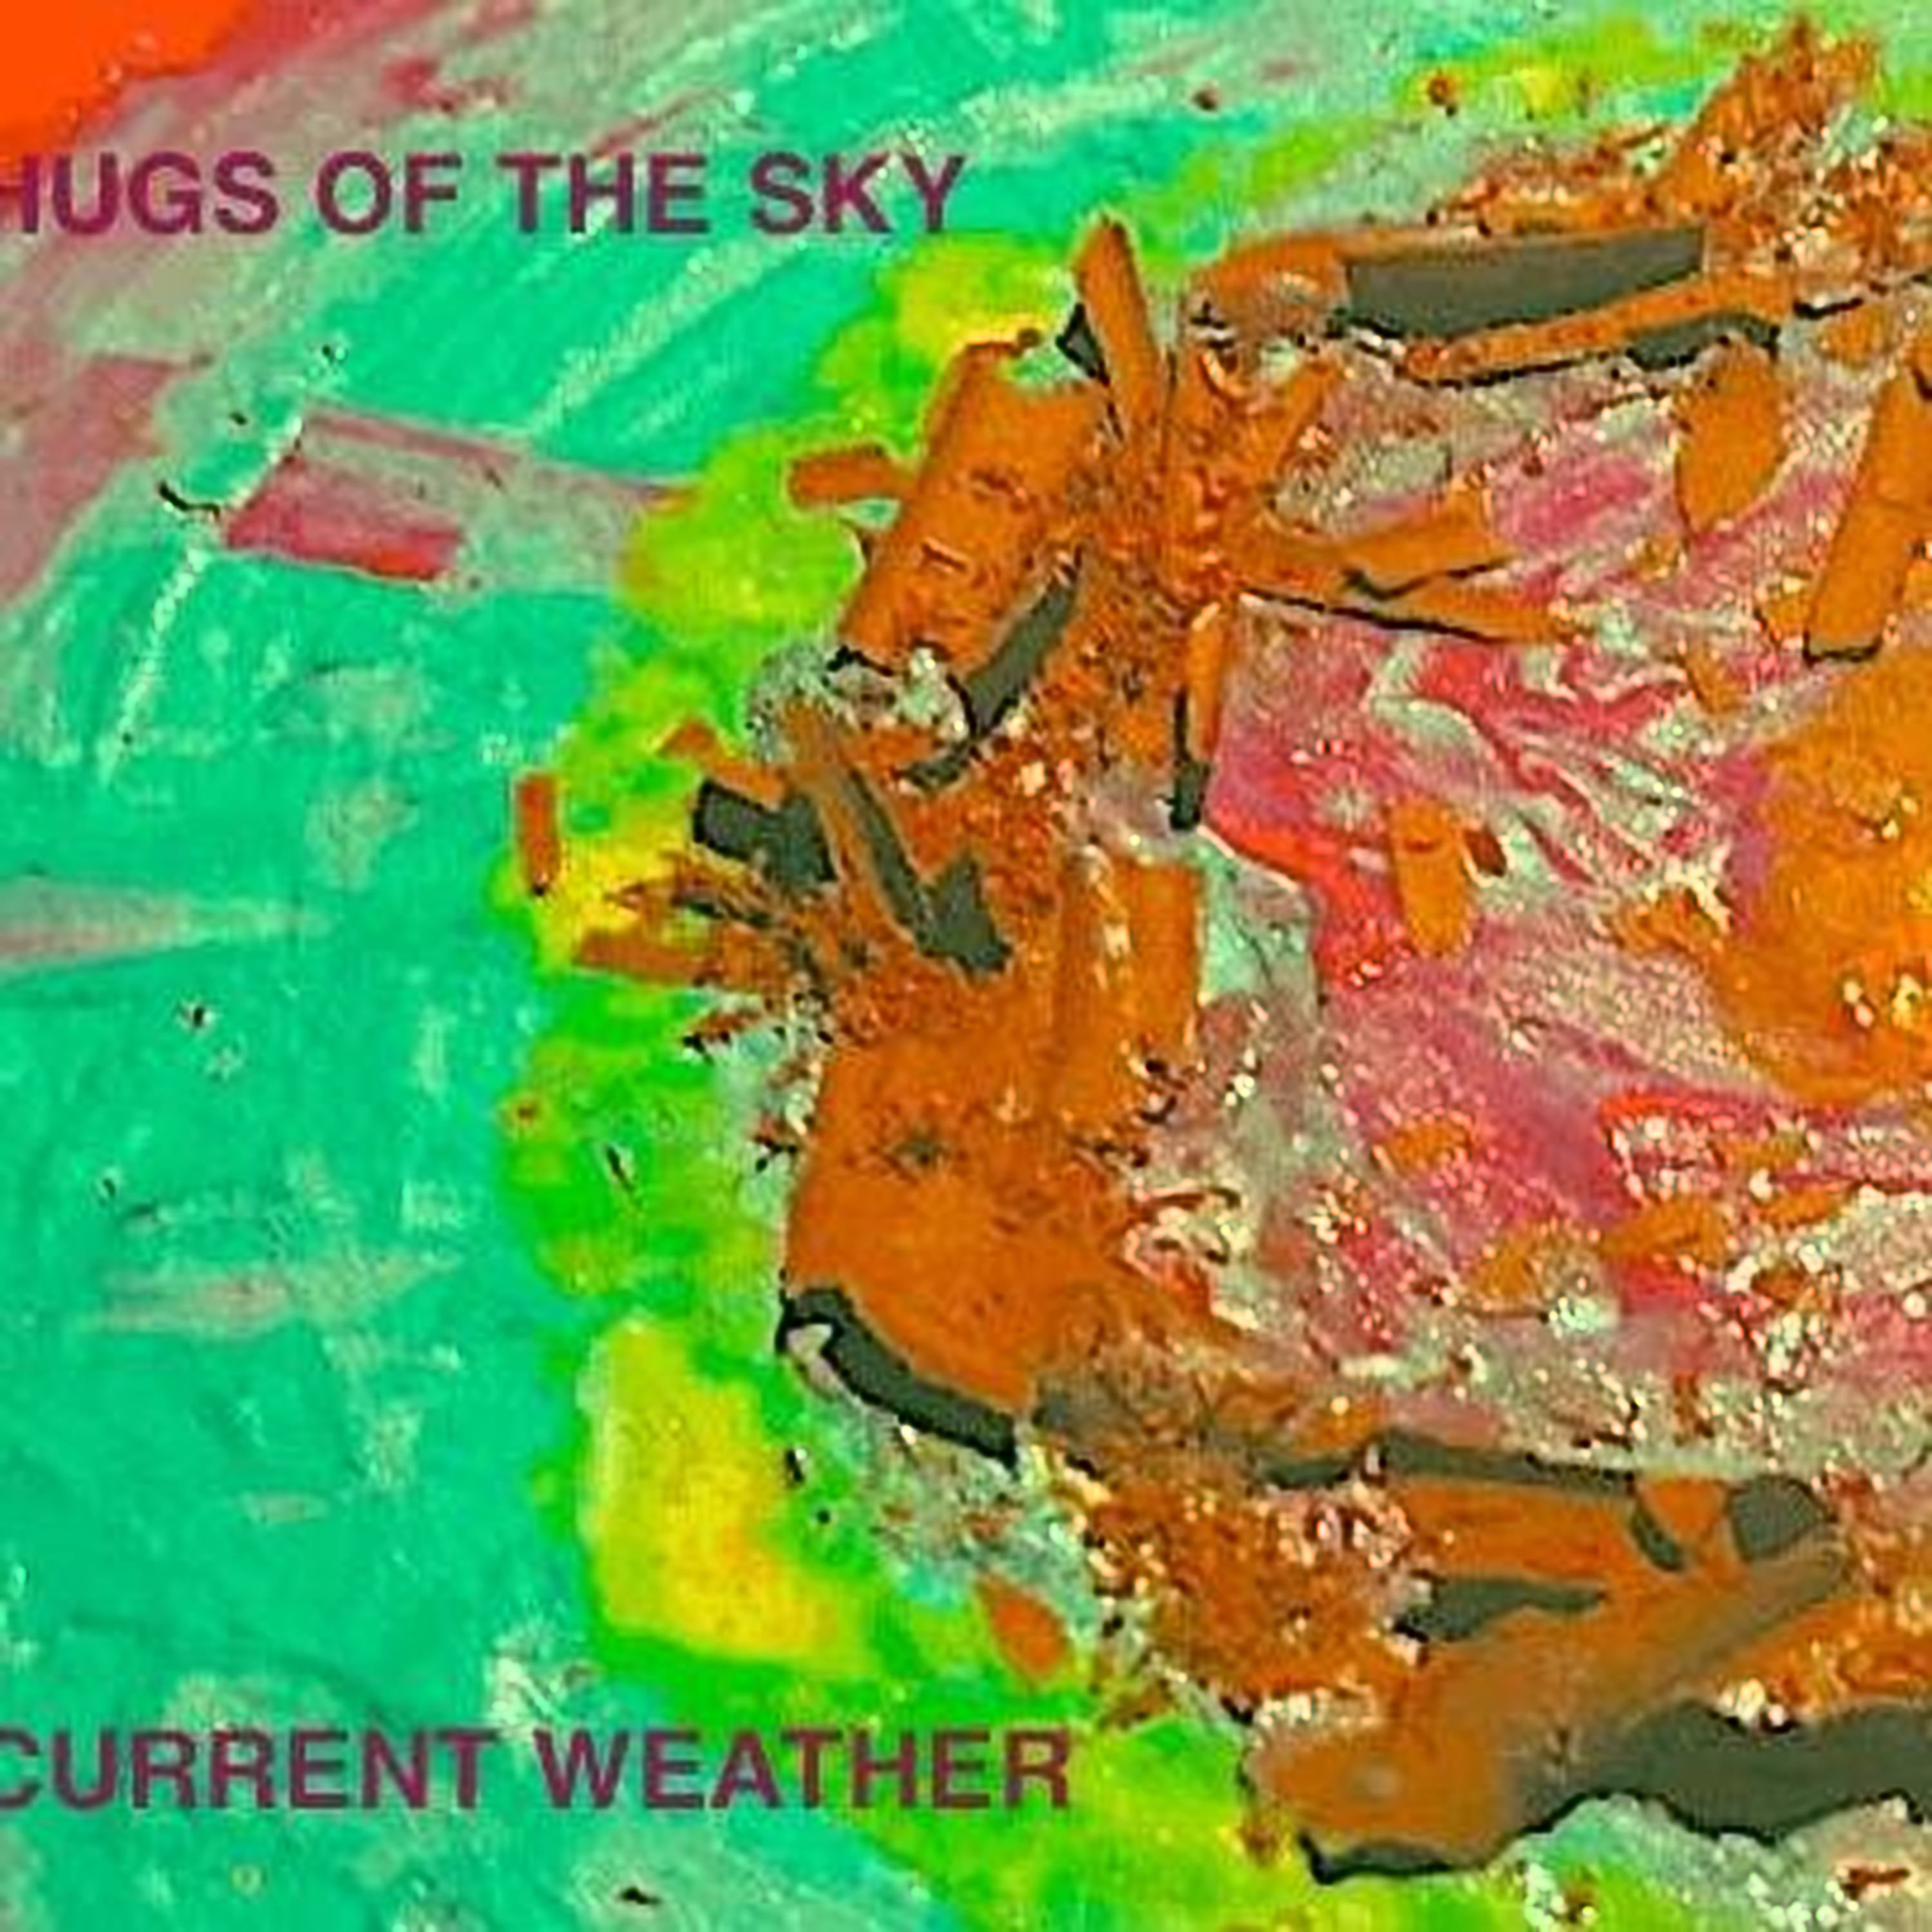 Hugs of the Sky - Current Weather front cover